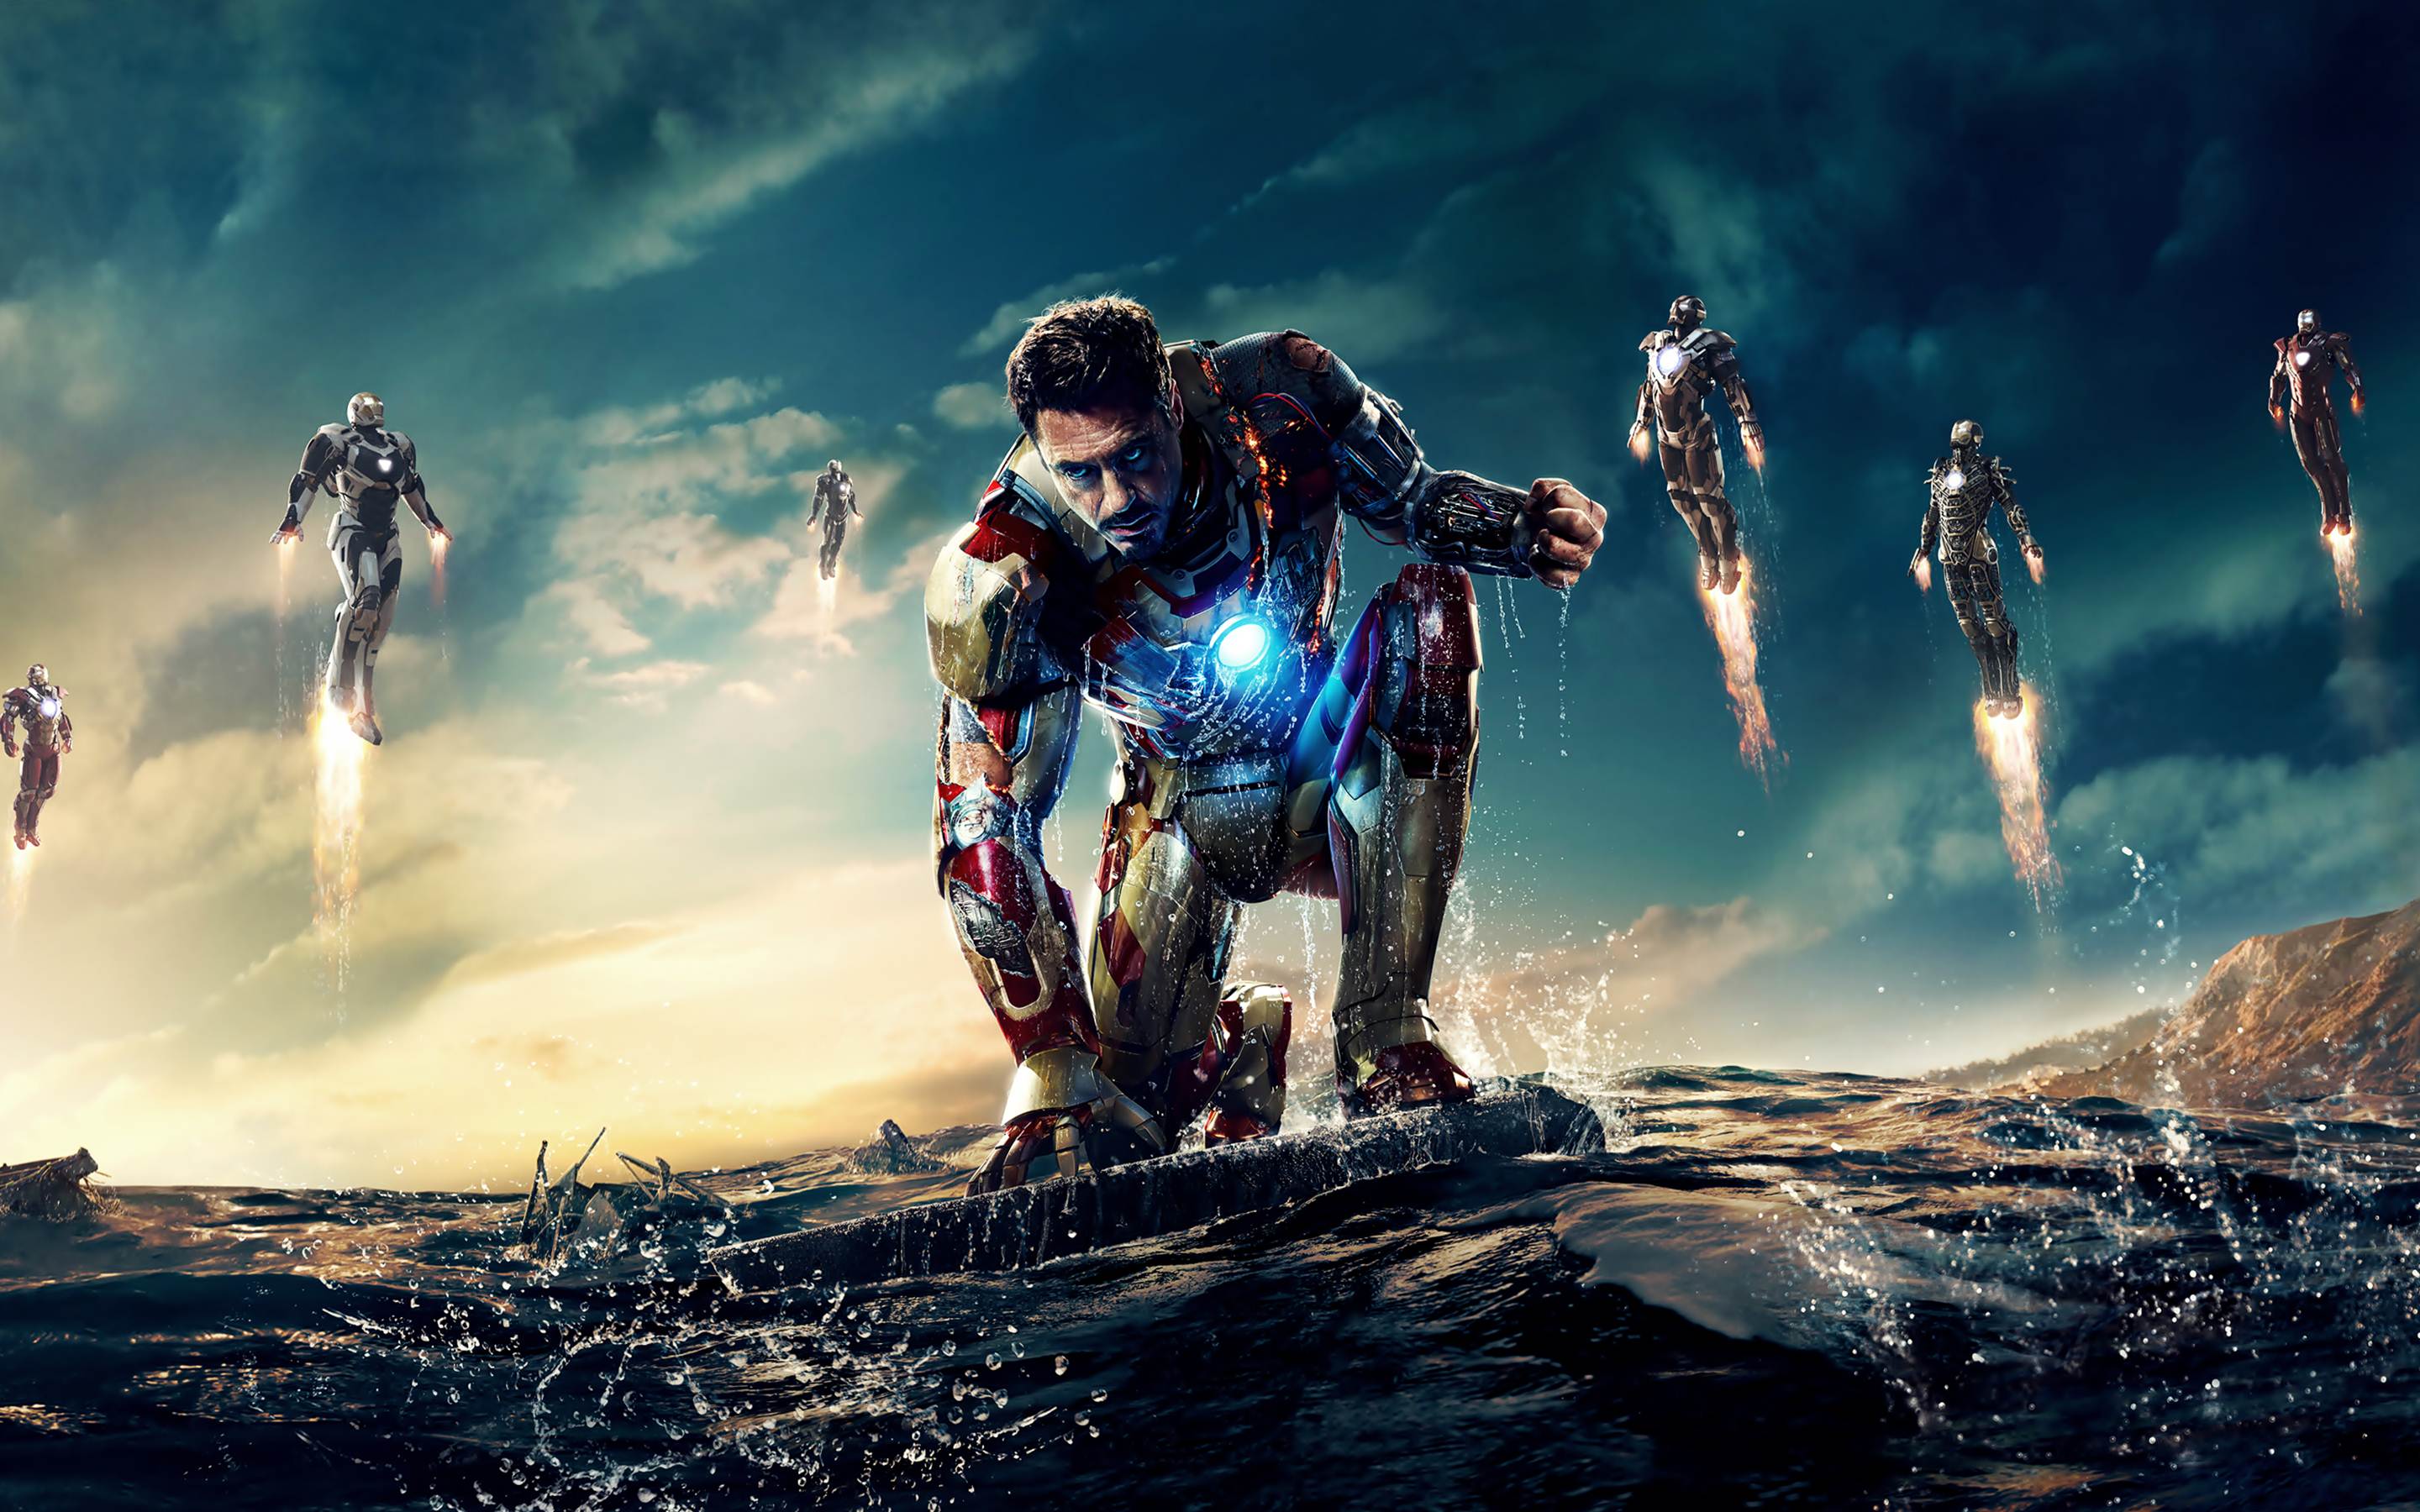 Tony Stark In Iron Man HD Wallpaper Image Pictures